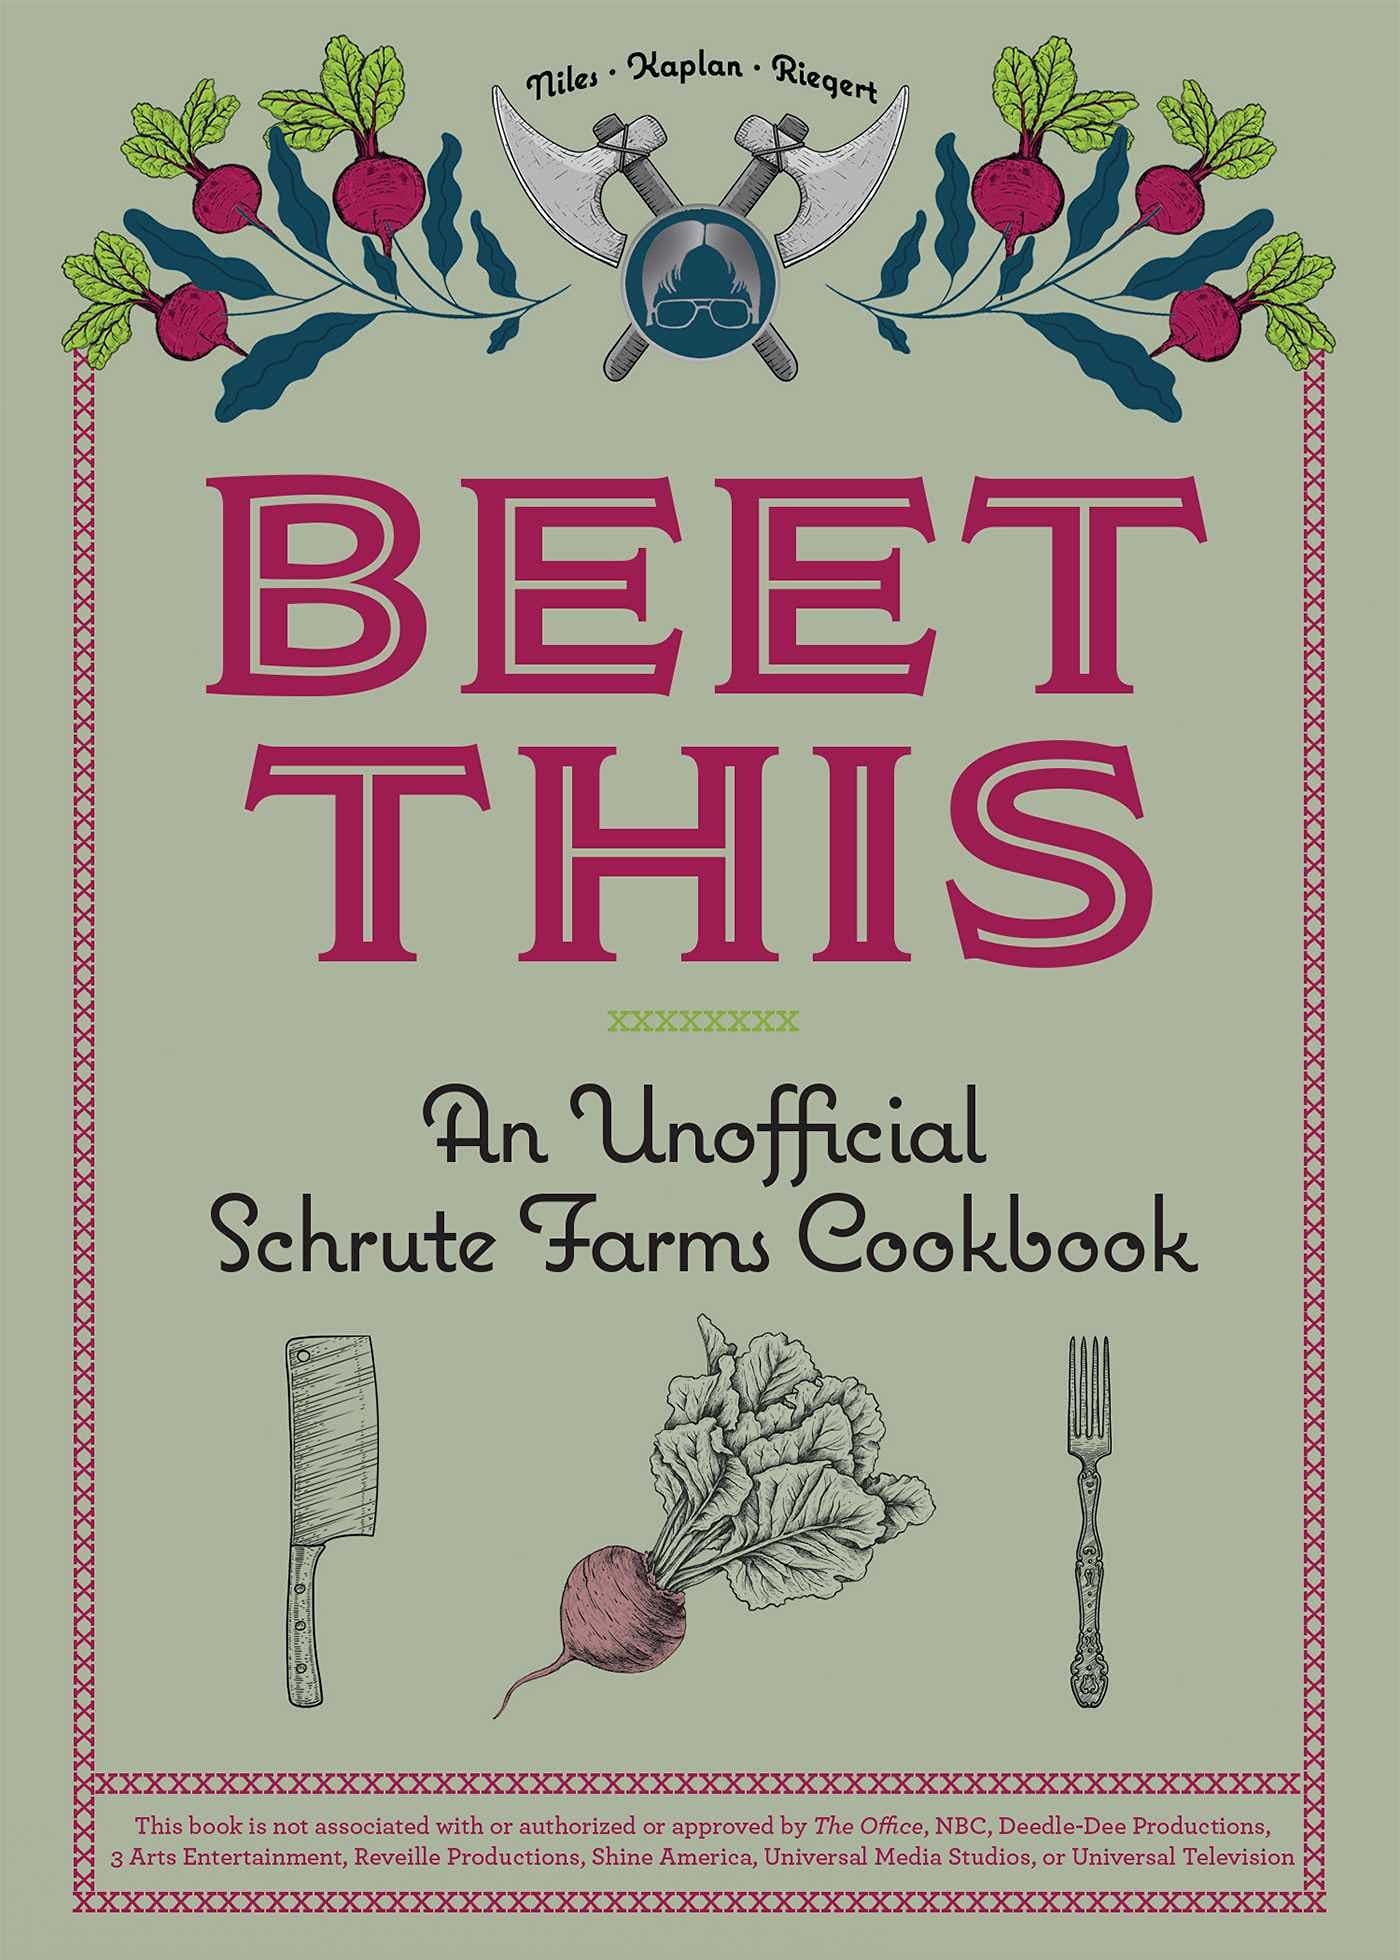 Discover Ulysses Press's 'Beet This: An Unofficial Schrute Farms Cookbook' by Tyanni Niles, Sam Kaplan, and Keith Riegert on Amazon.